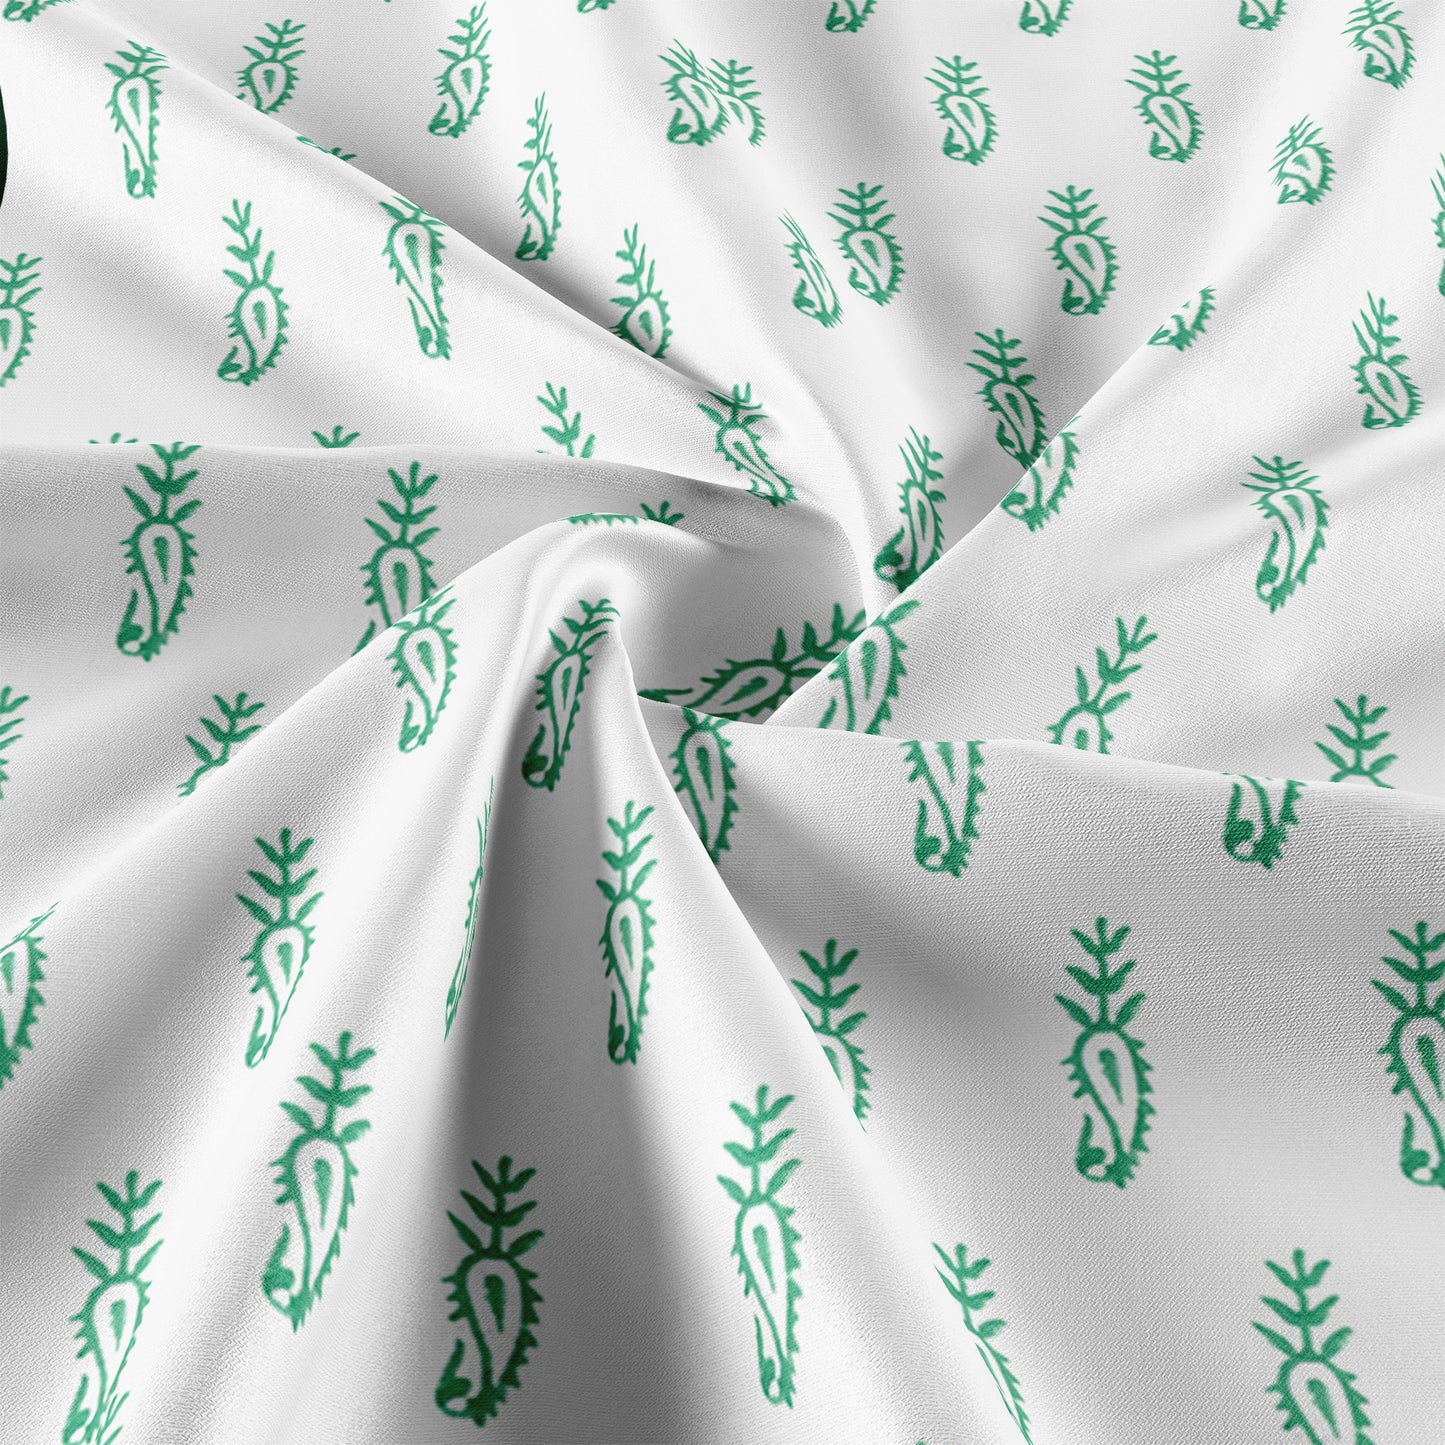 Cotton Blanket - Single Dohar ( 60 x 90 Inches) Green Bouquet